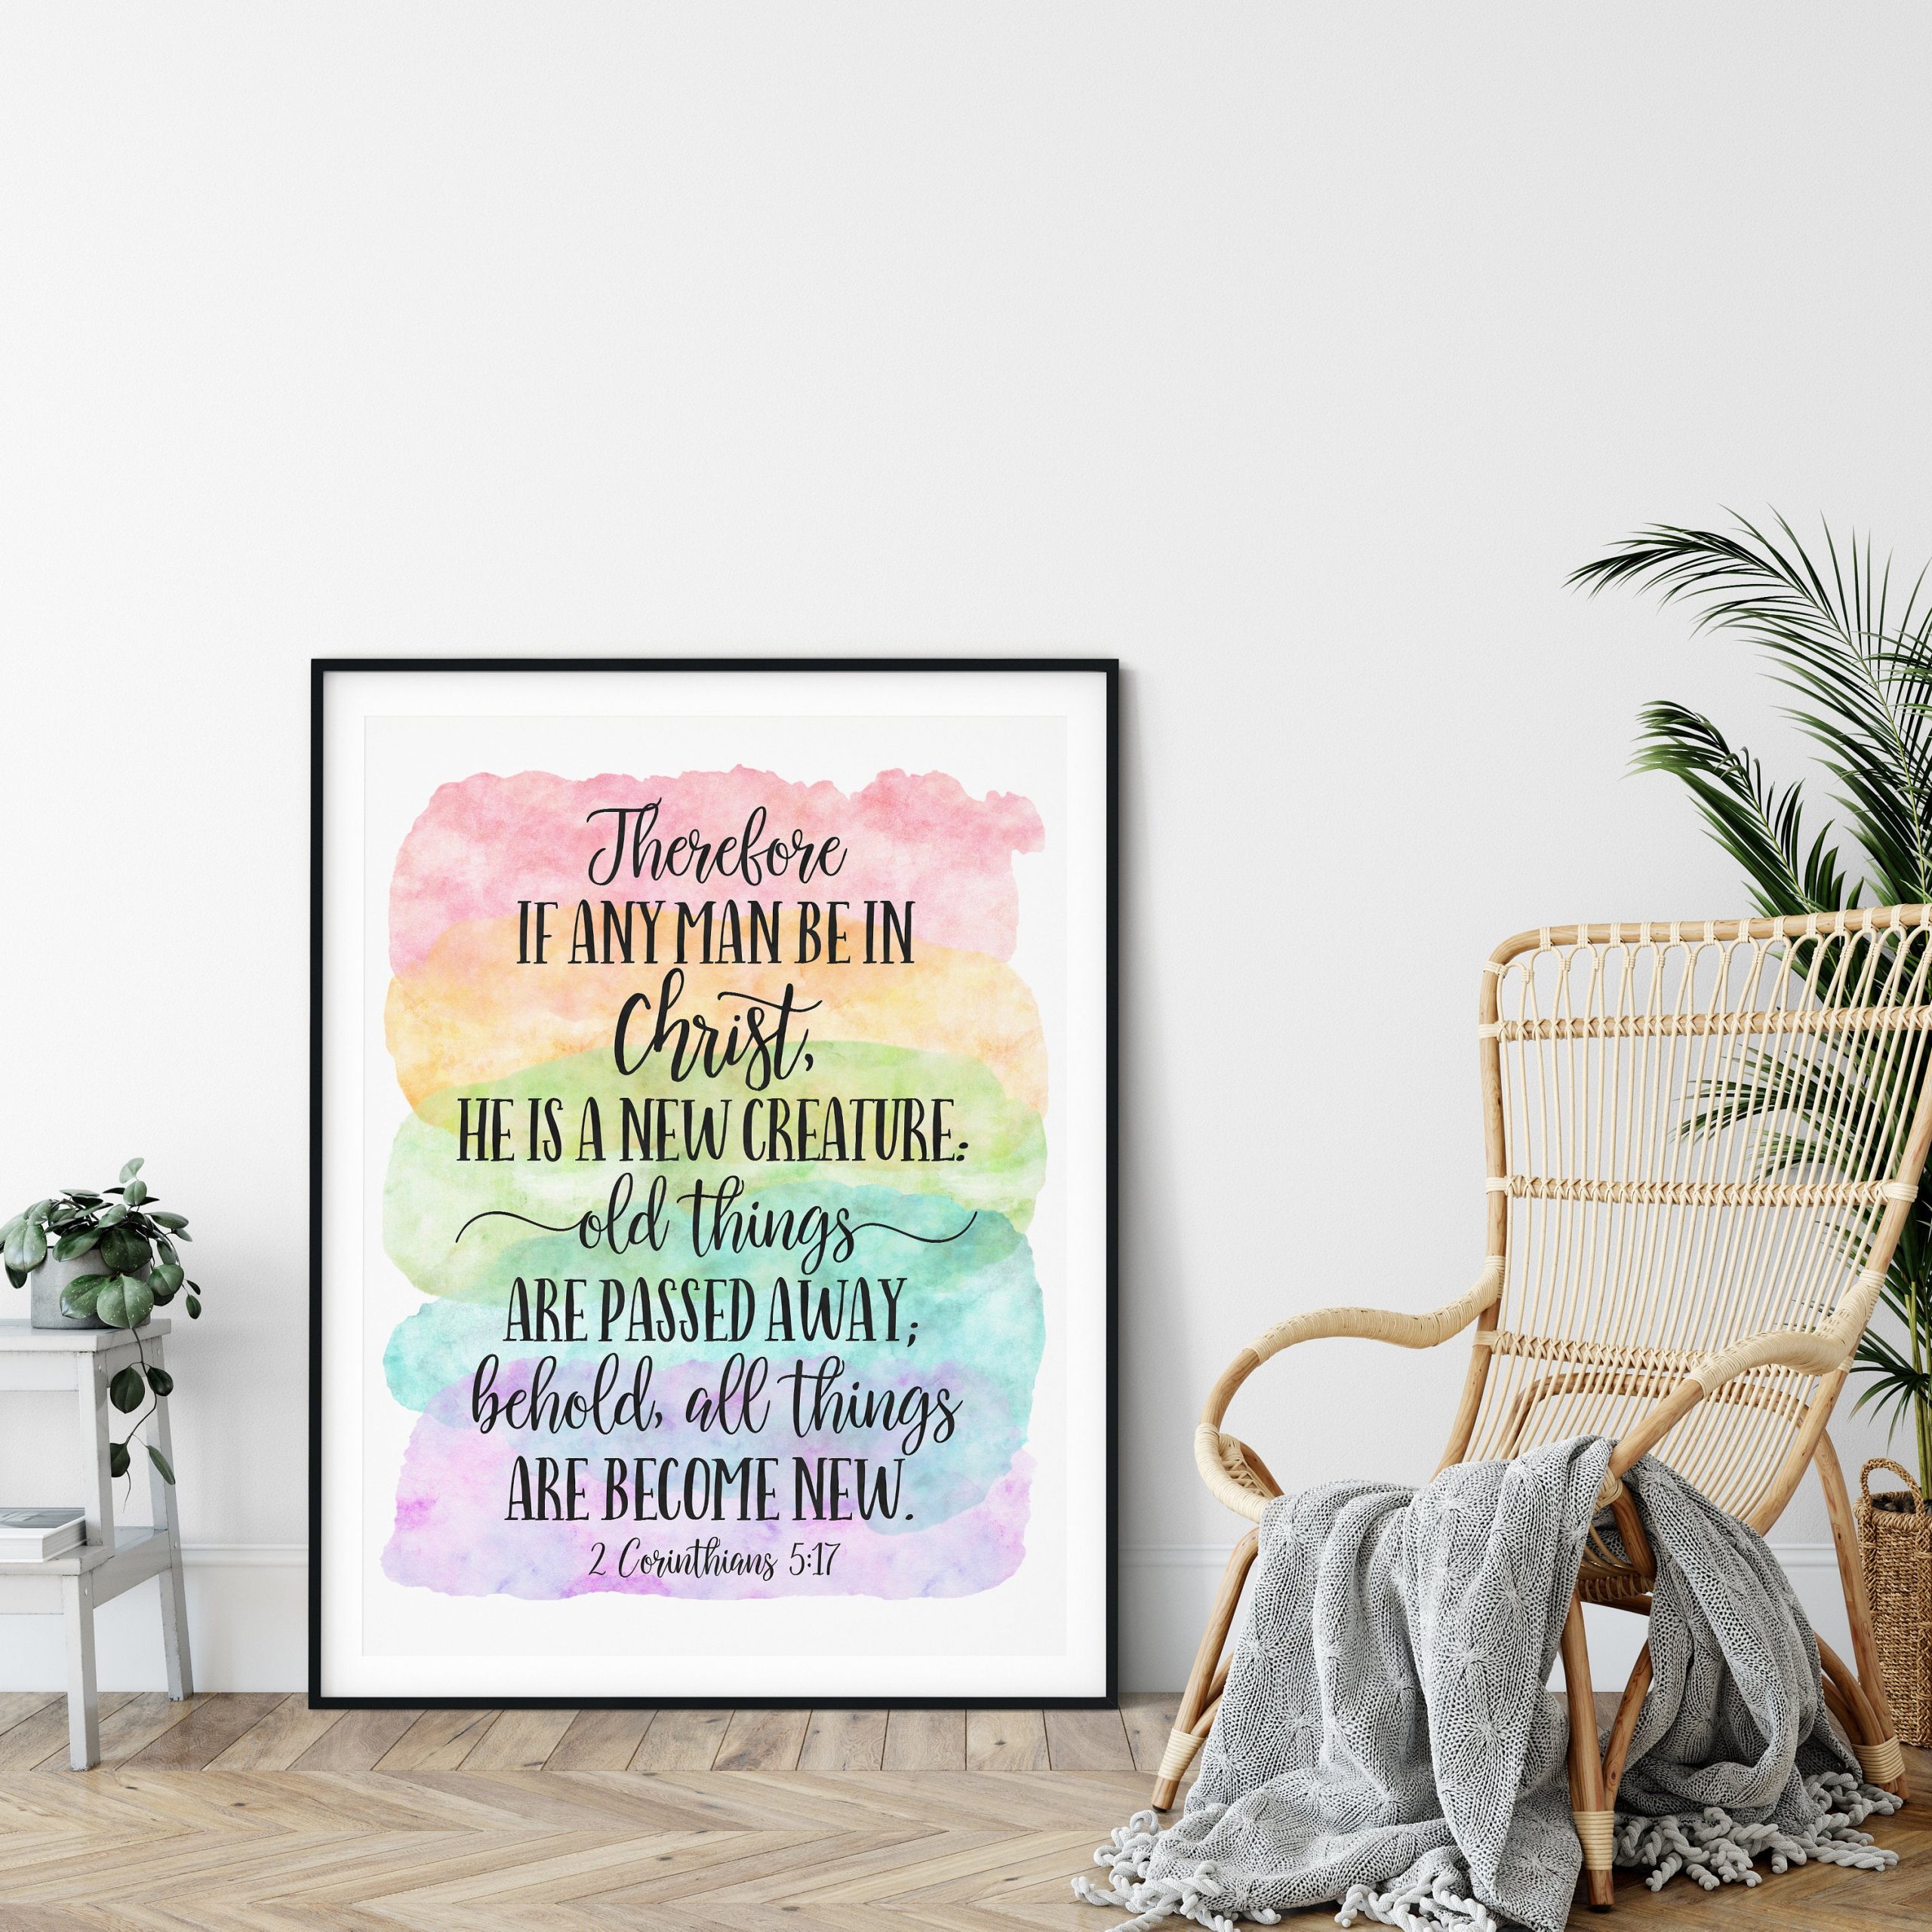 If Any Man Be In Christ, He Is A New Creature, 2 Corinthians 5:17, Printable Scripture Wall Art